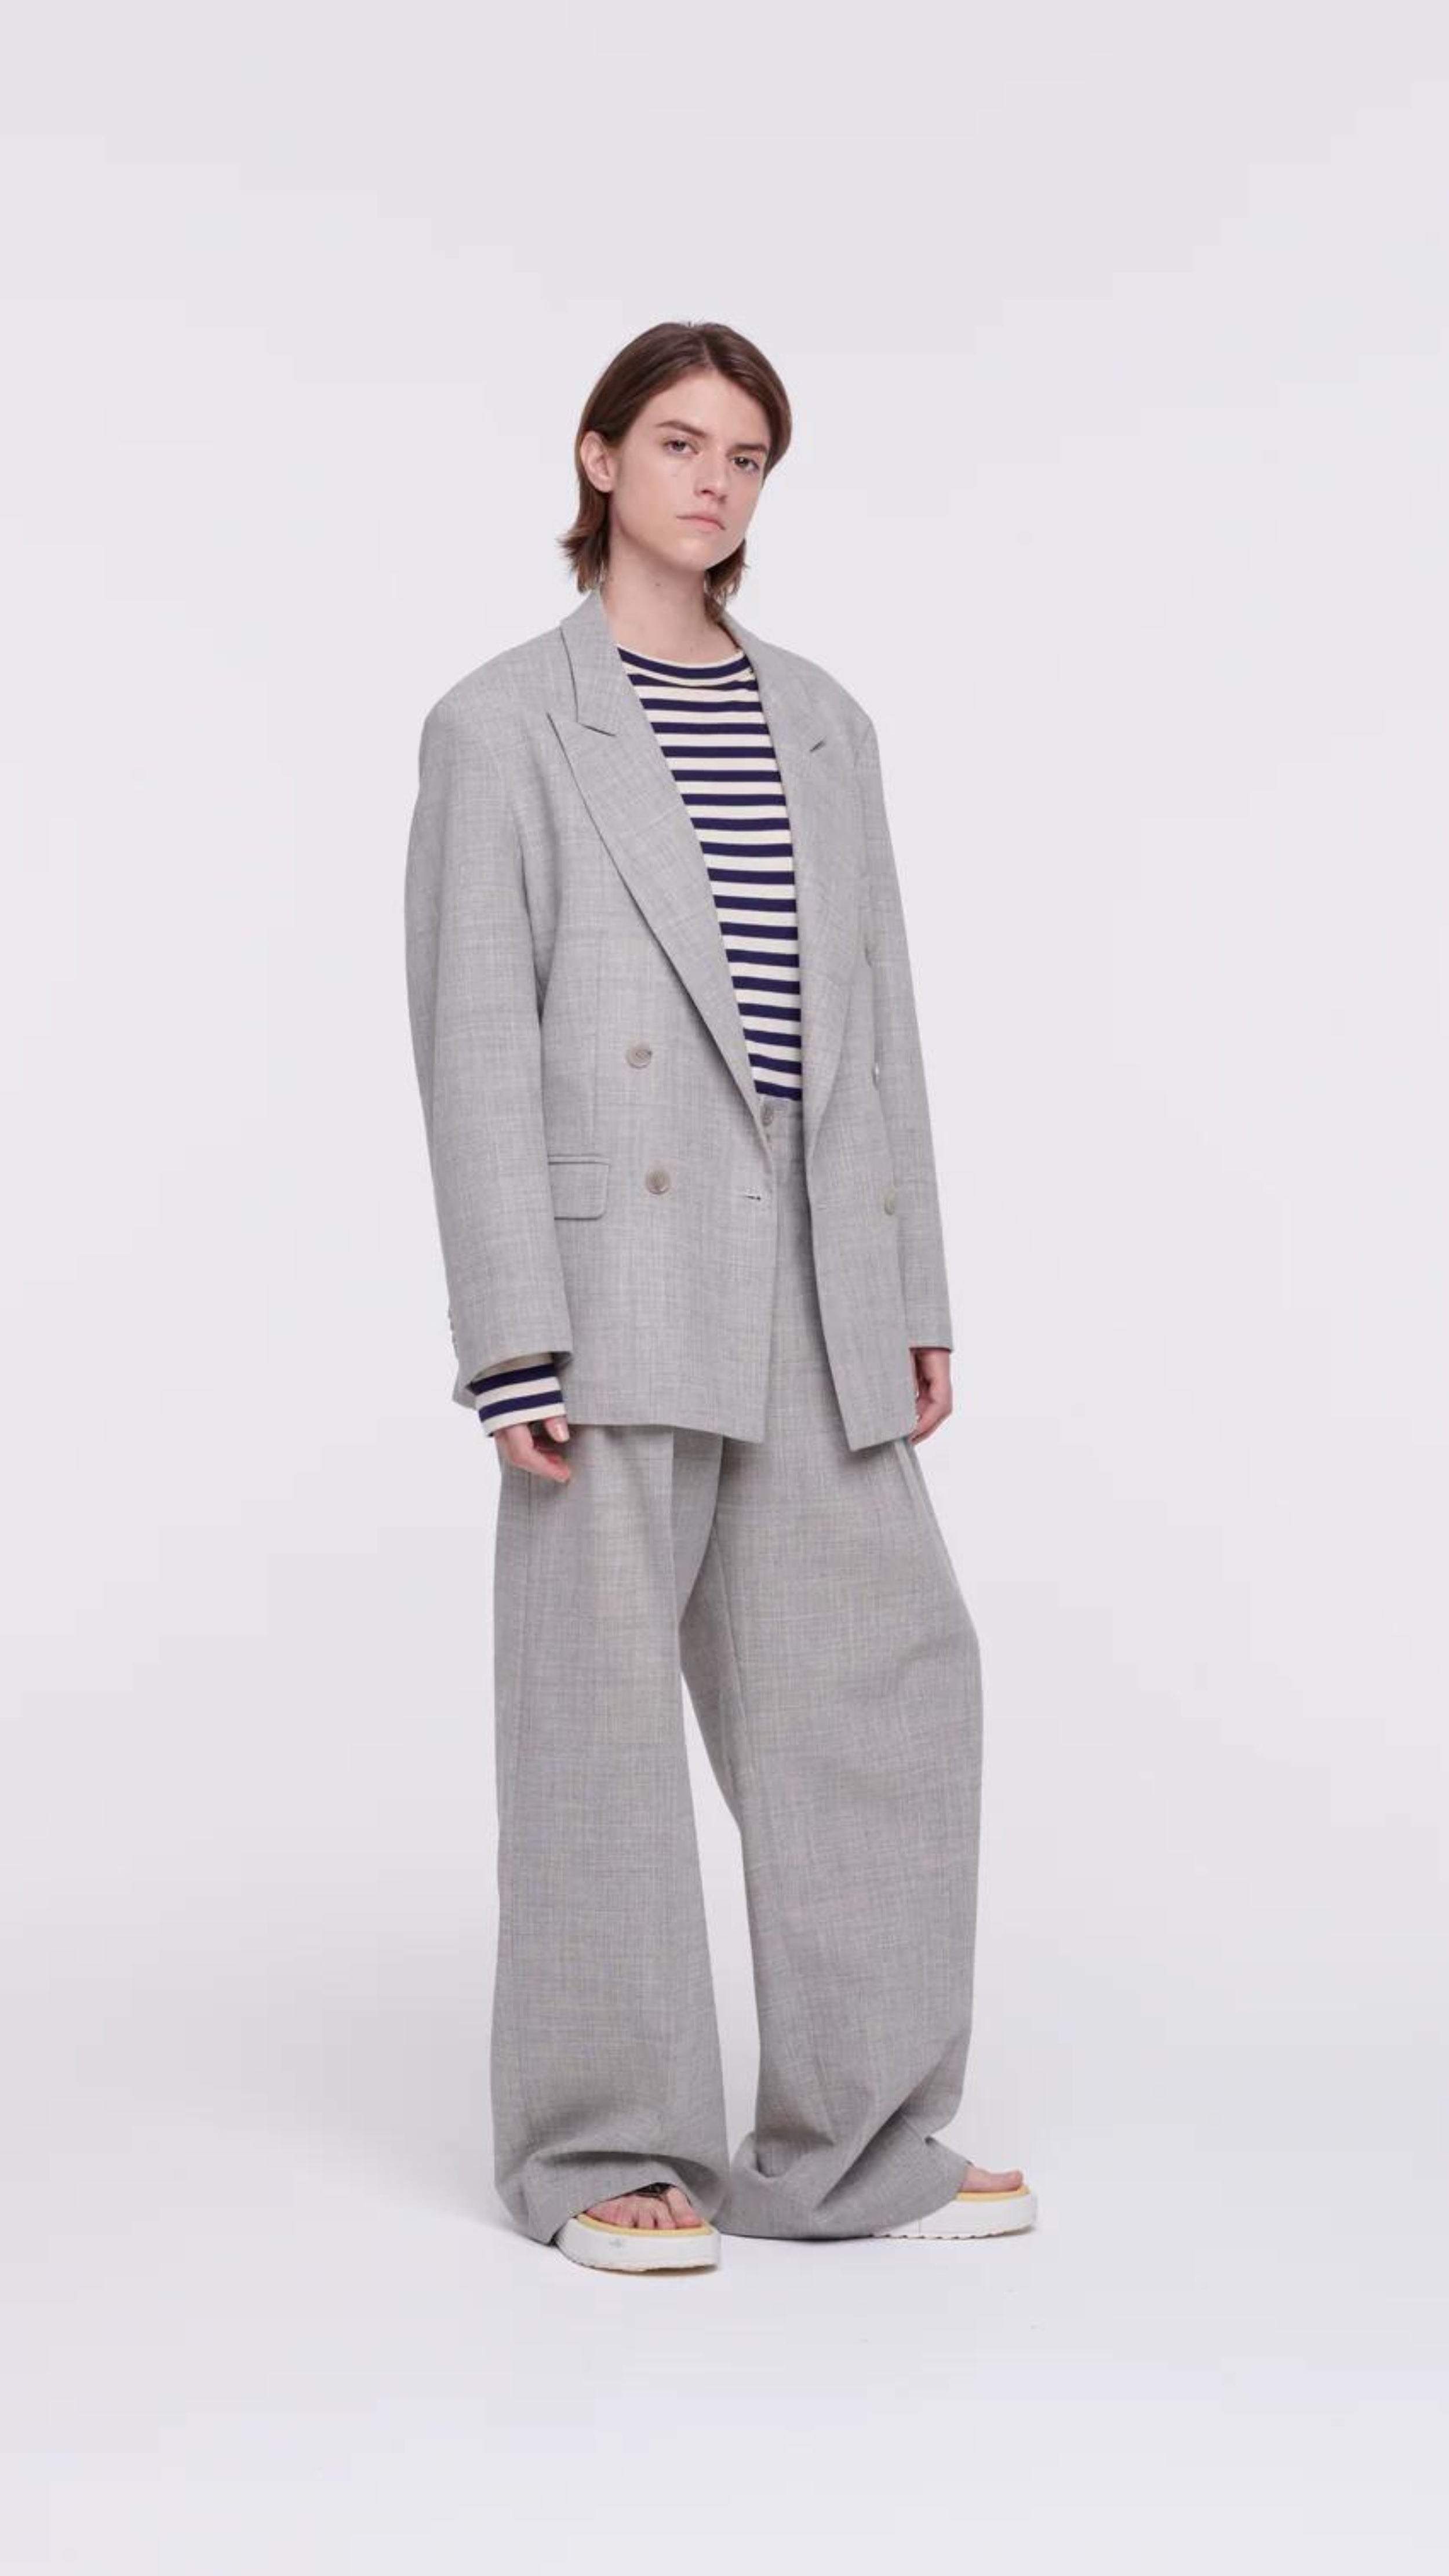 Plan C Pleated Melange Wide Leg Pants. tailored-cut and high-rise fit and wide leg trouser. With double pleating, button fastening closure, and pockets. Made in Italy from a light weight grey melange wool panama weave. Shown on model.